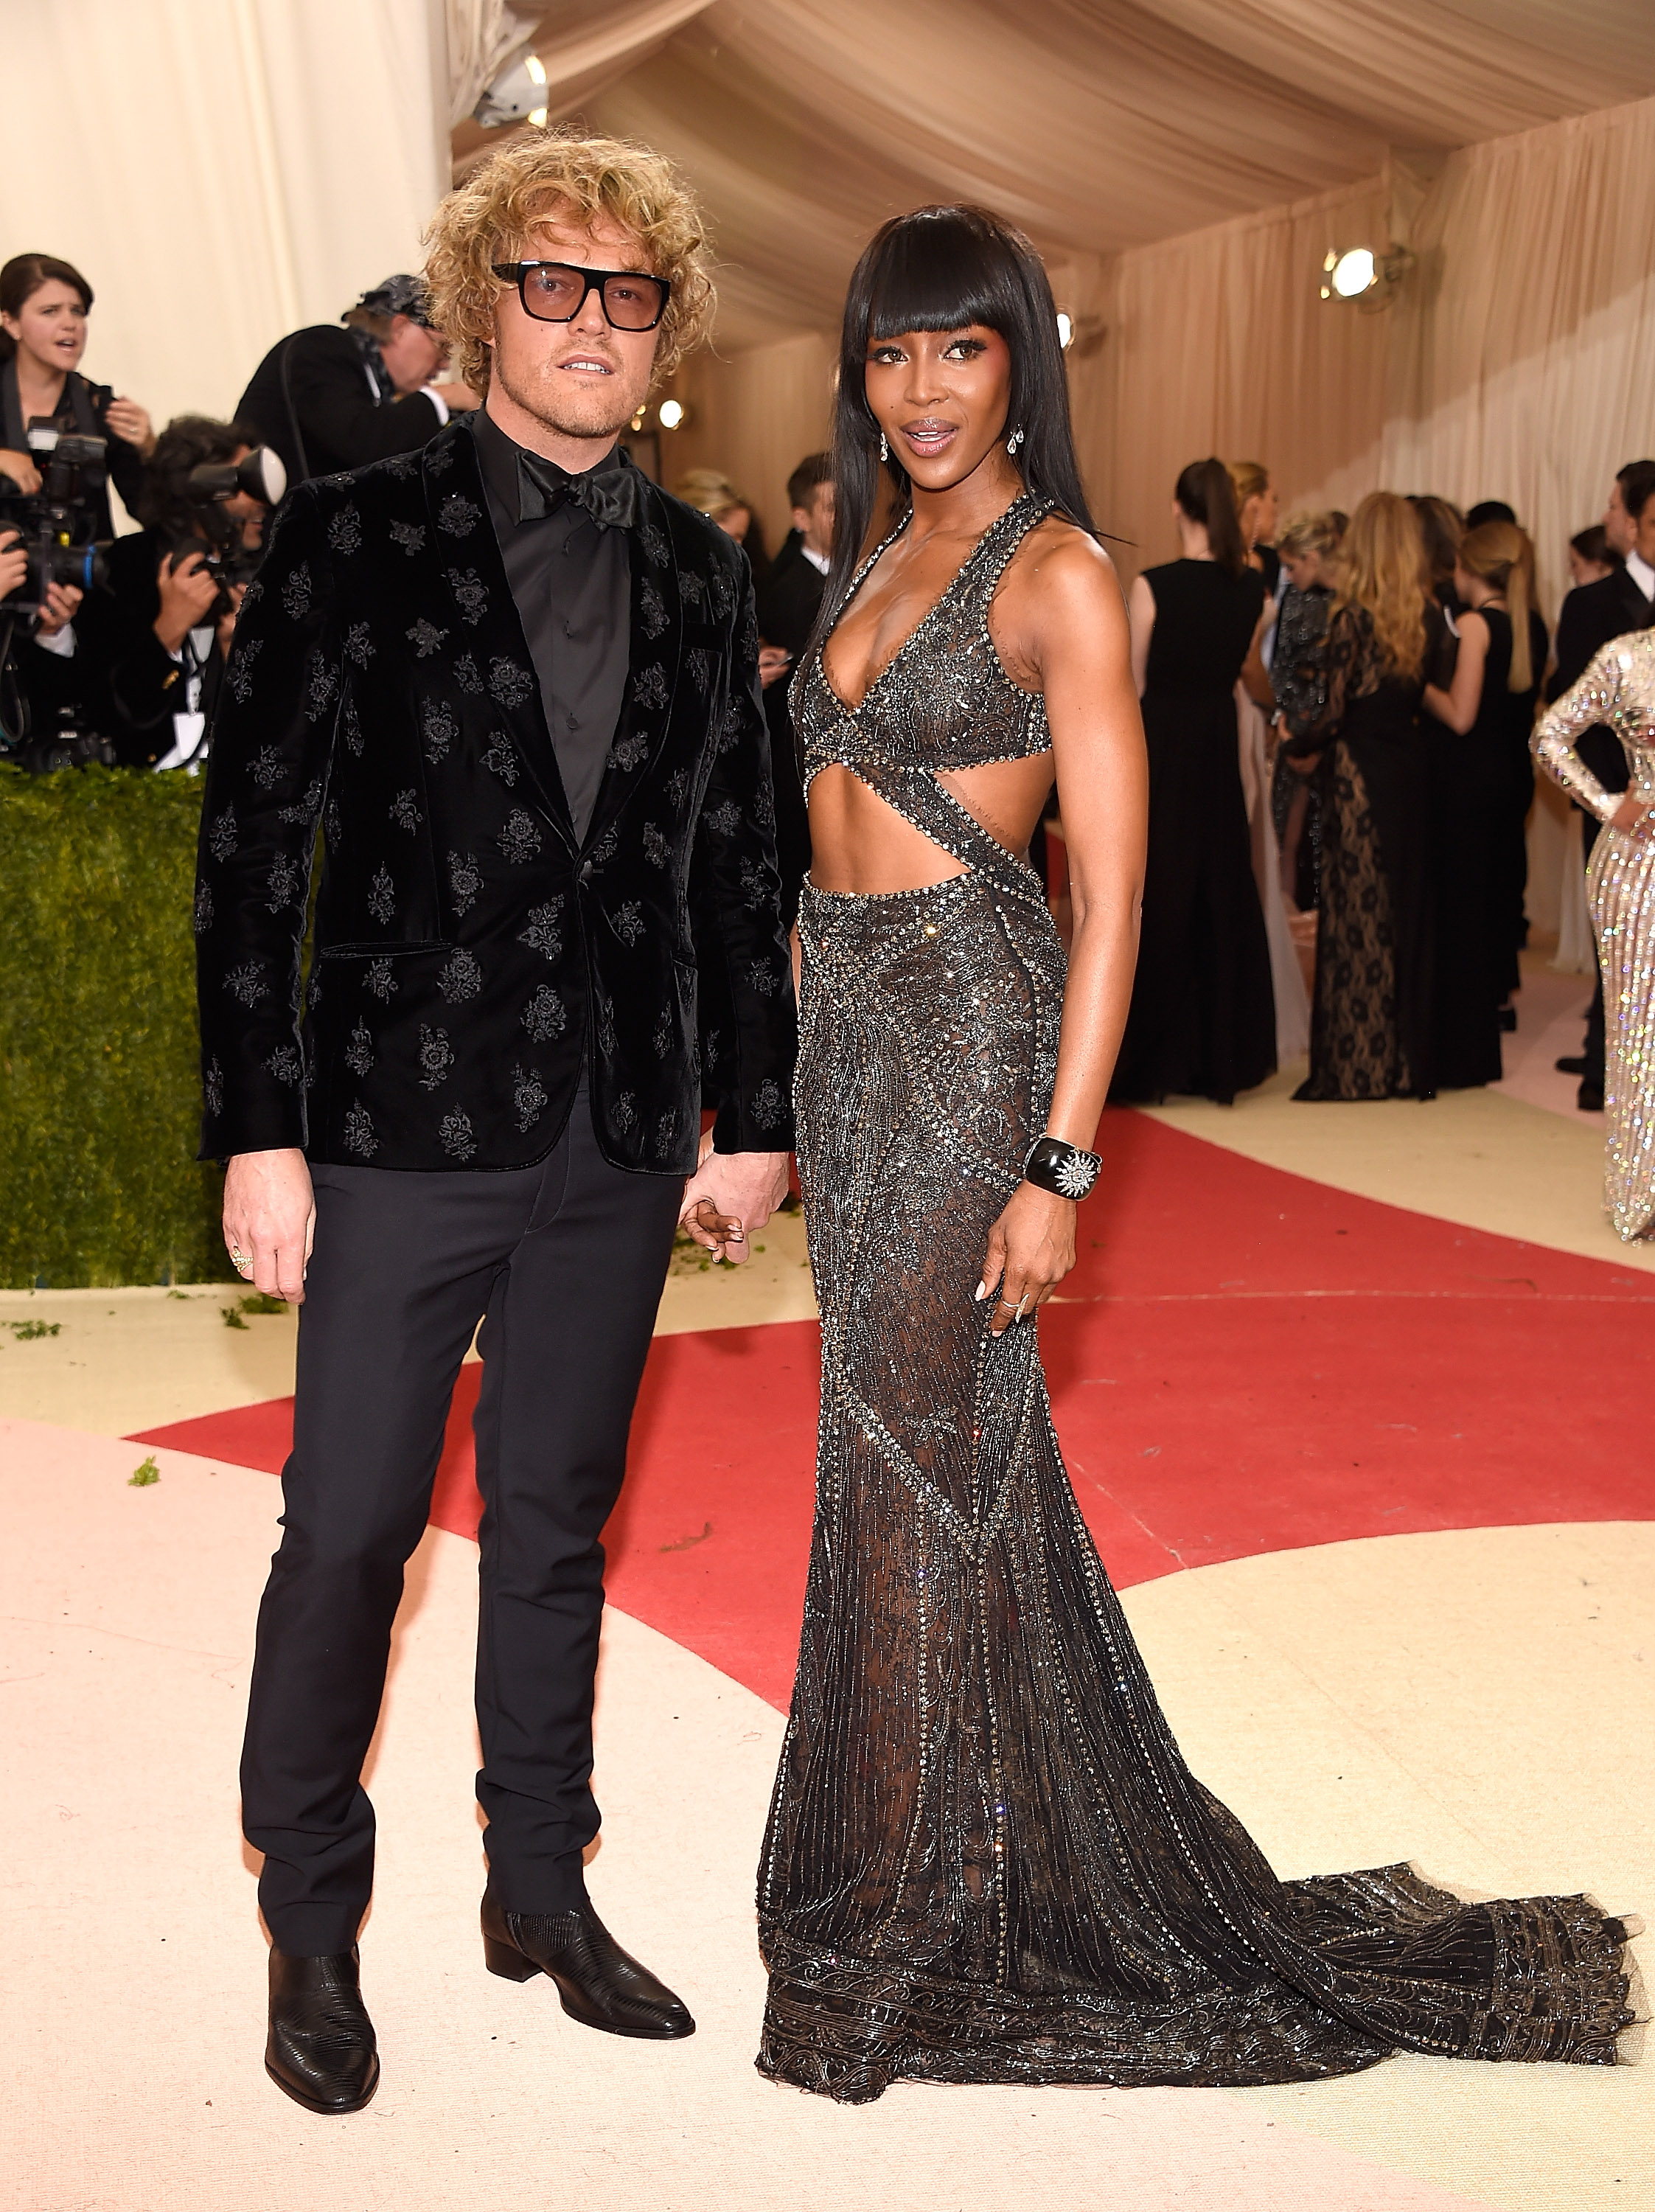 Peter Dundas and Naomi Campbell attend "Manus x Machina: Fashion In An Age Of Technology" Costume Institute Gala at Metropolitan Museum of Art on May 2, 2016 in New York City.